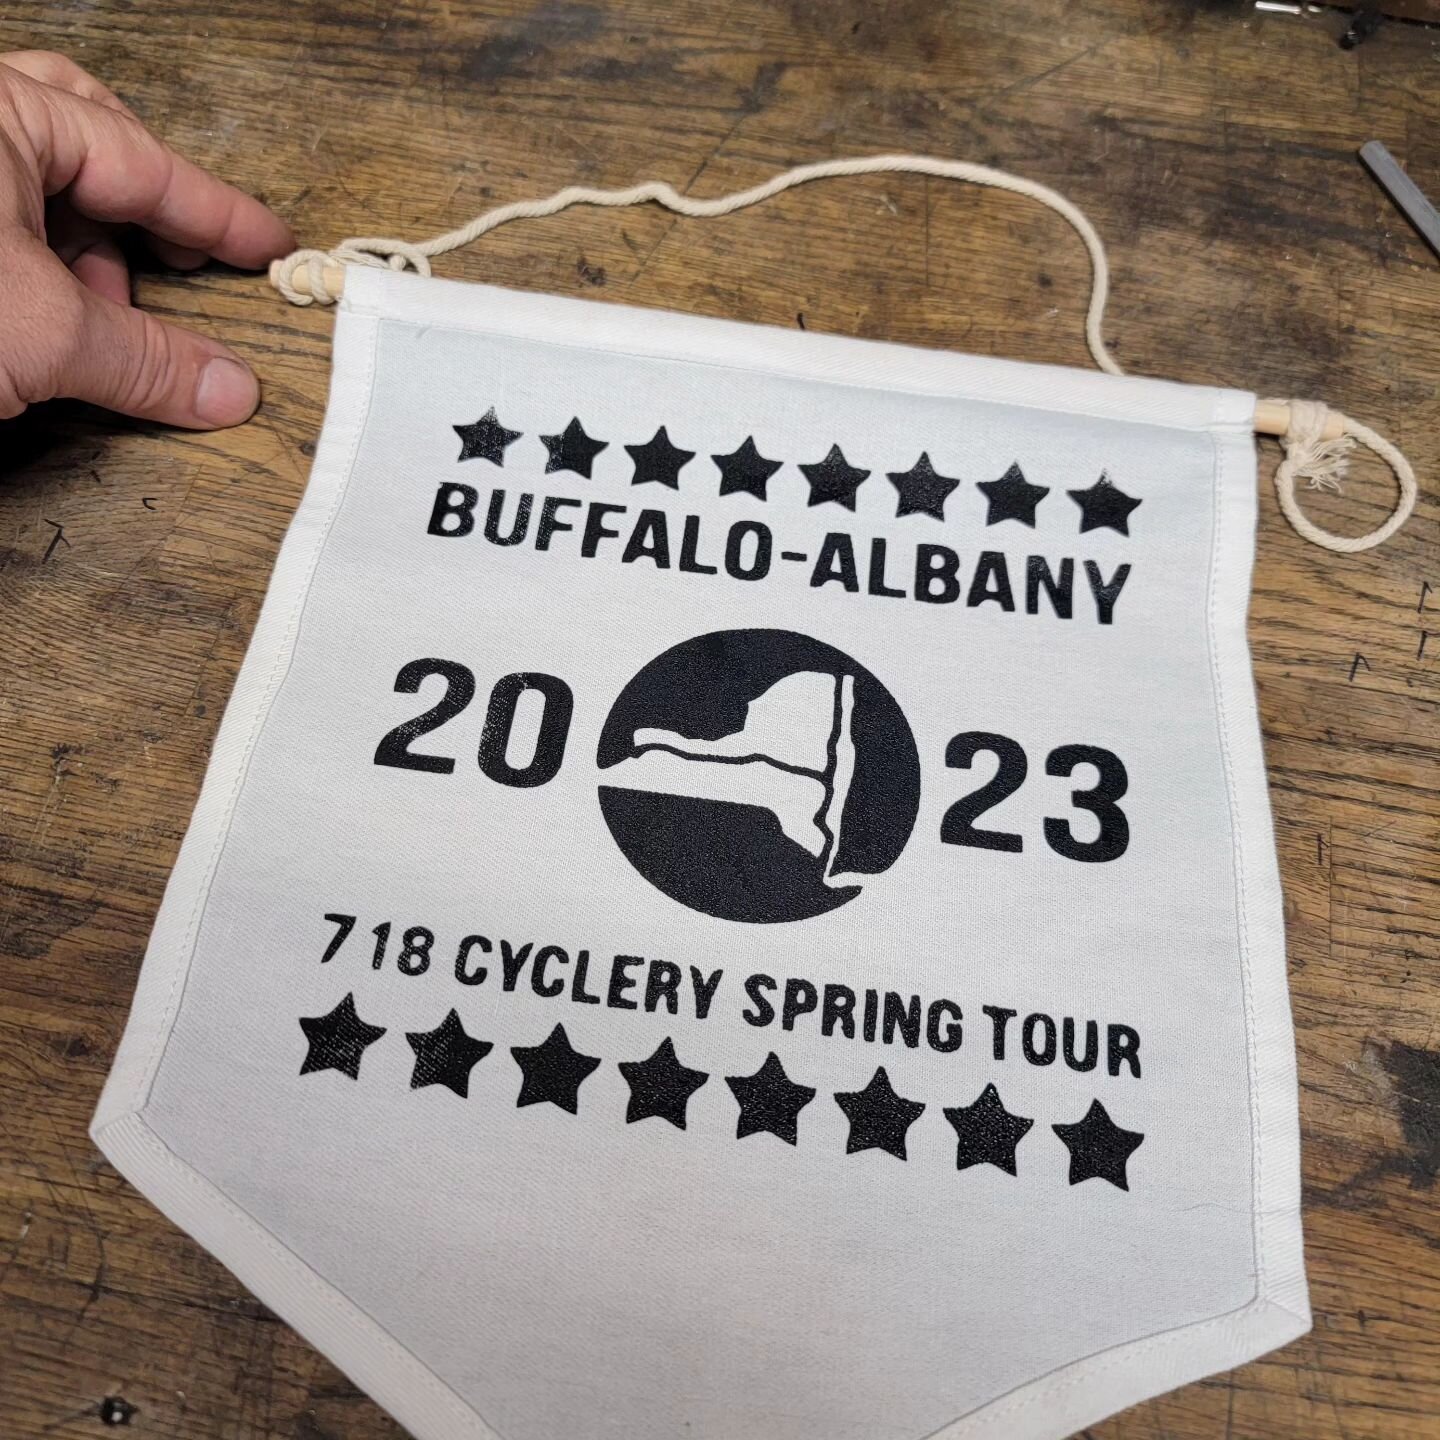 Just designed and printed a Spring Tour banner and shirt...16 stars = 16 riders.

Trip leaves June 4.

#718springtour #eriecanal #Buffalo #Albany #empirestatetrail #bikecamping #screenprinting